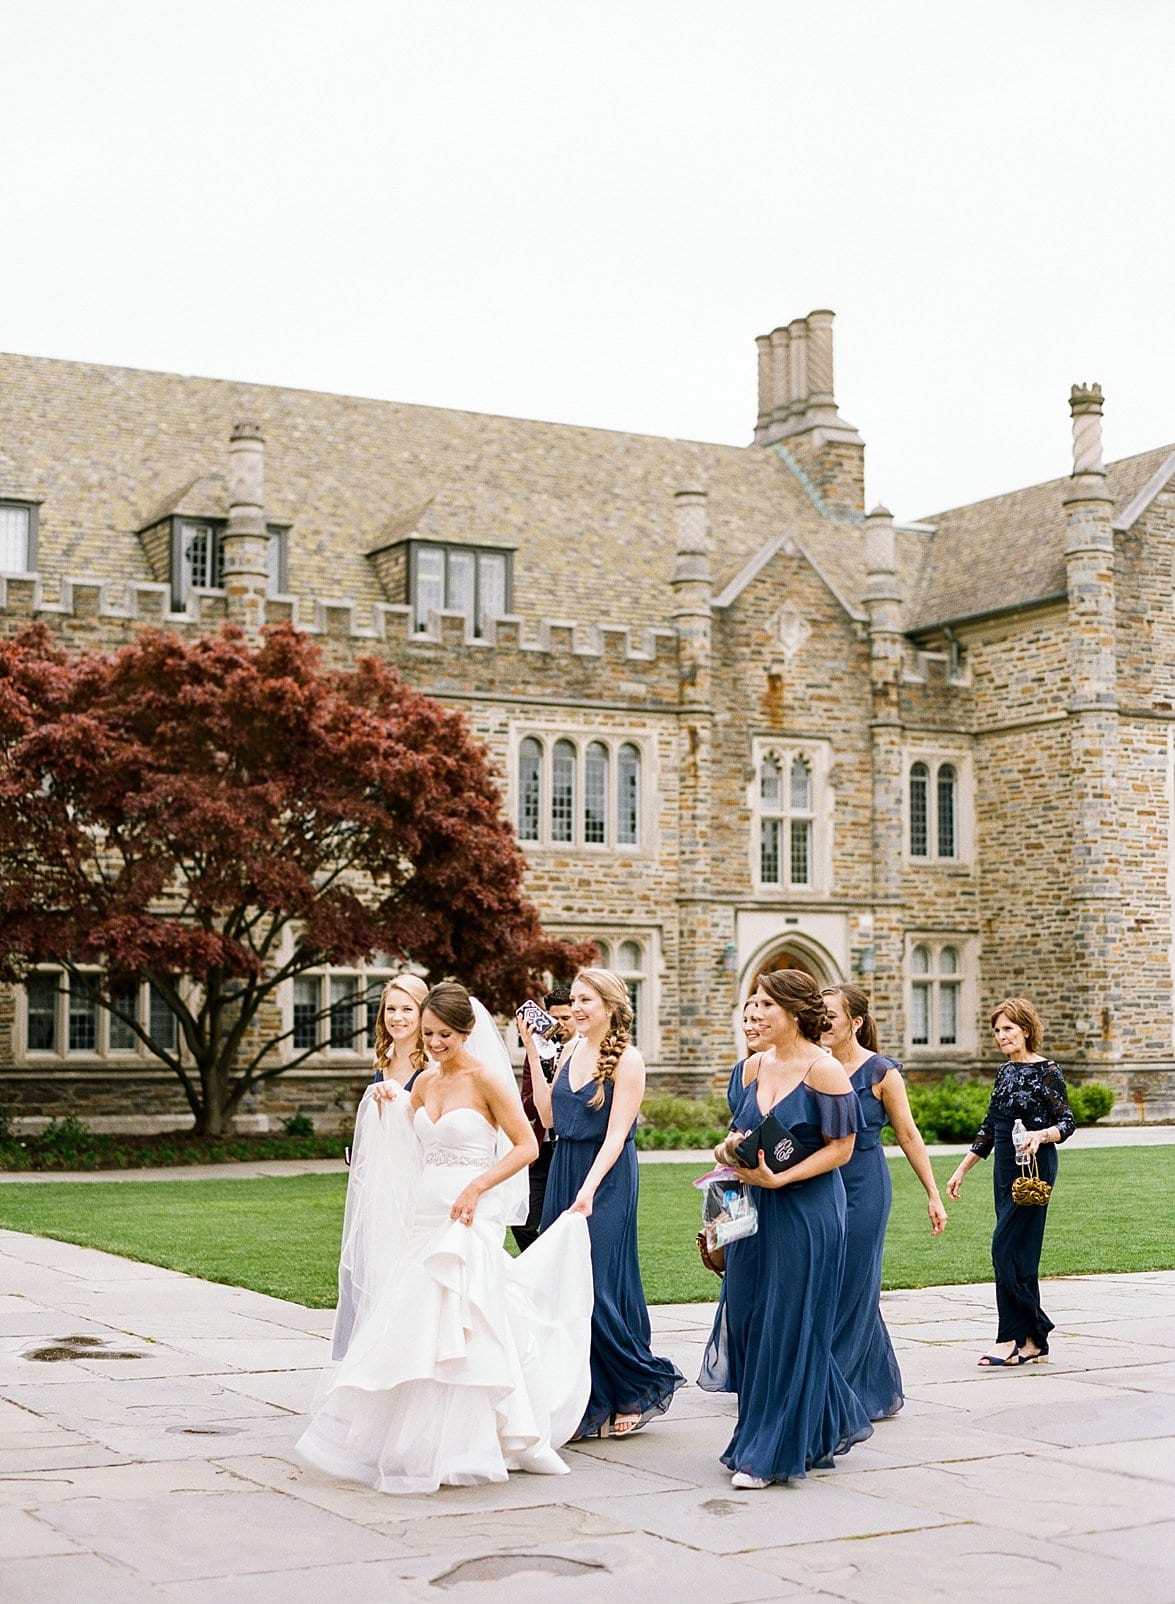 Duke Chapel bride walking to ceremony with her bridesmaids in long navy blue dresses helping her walk photo